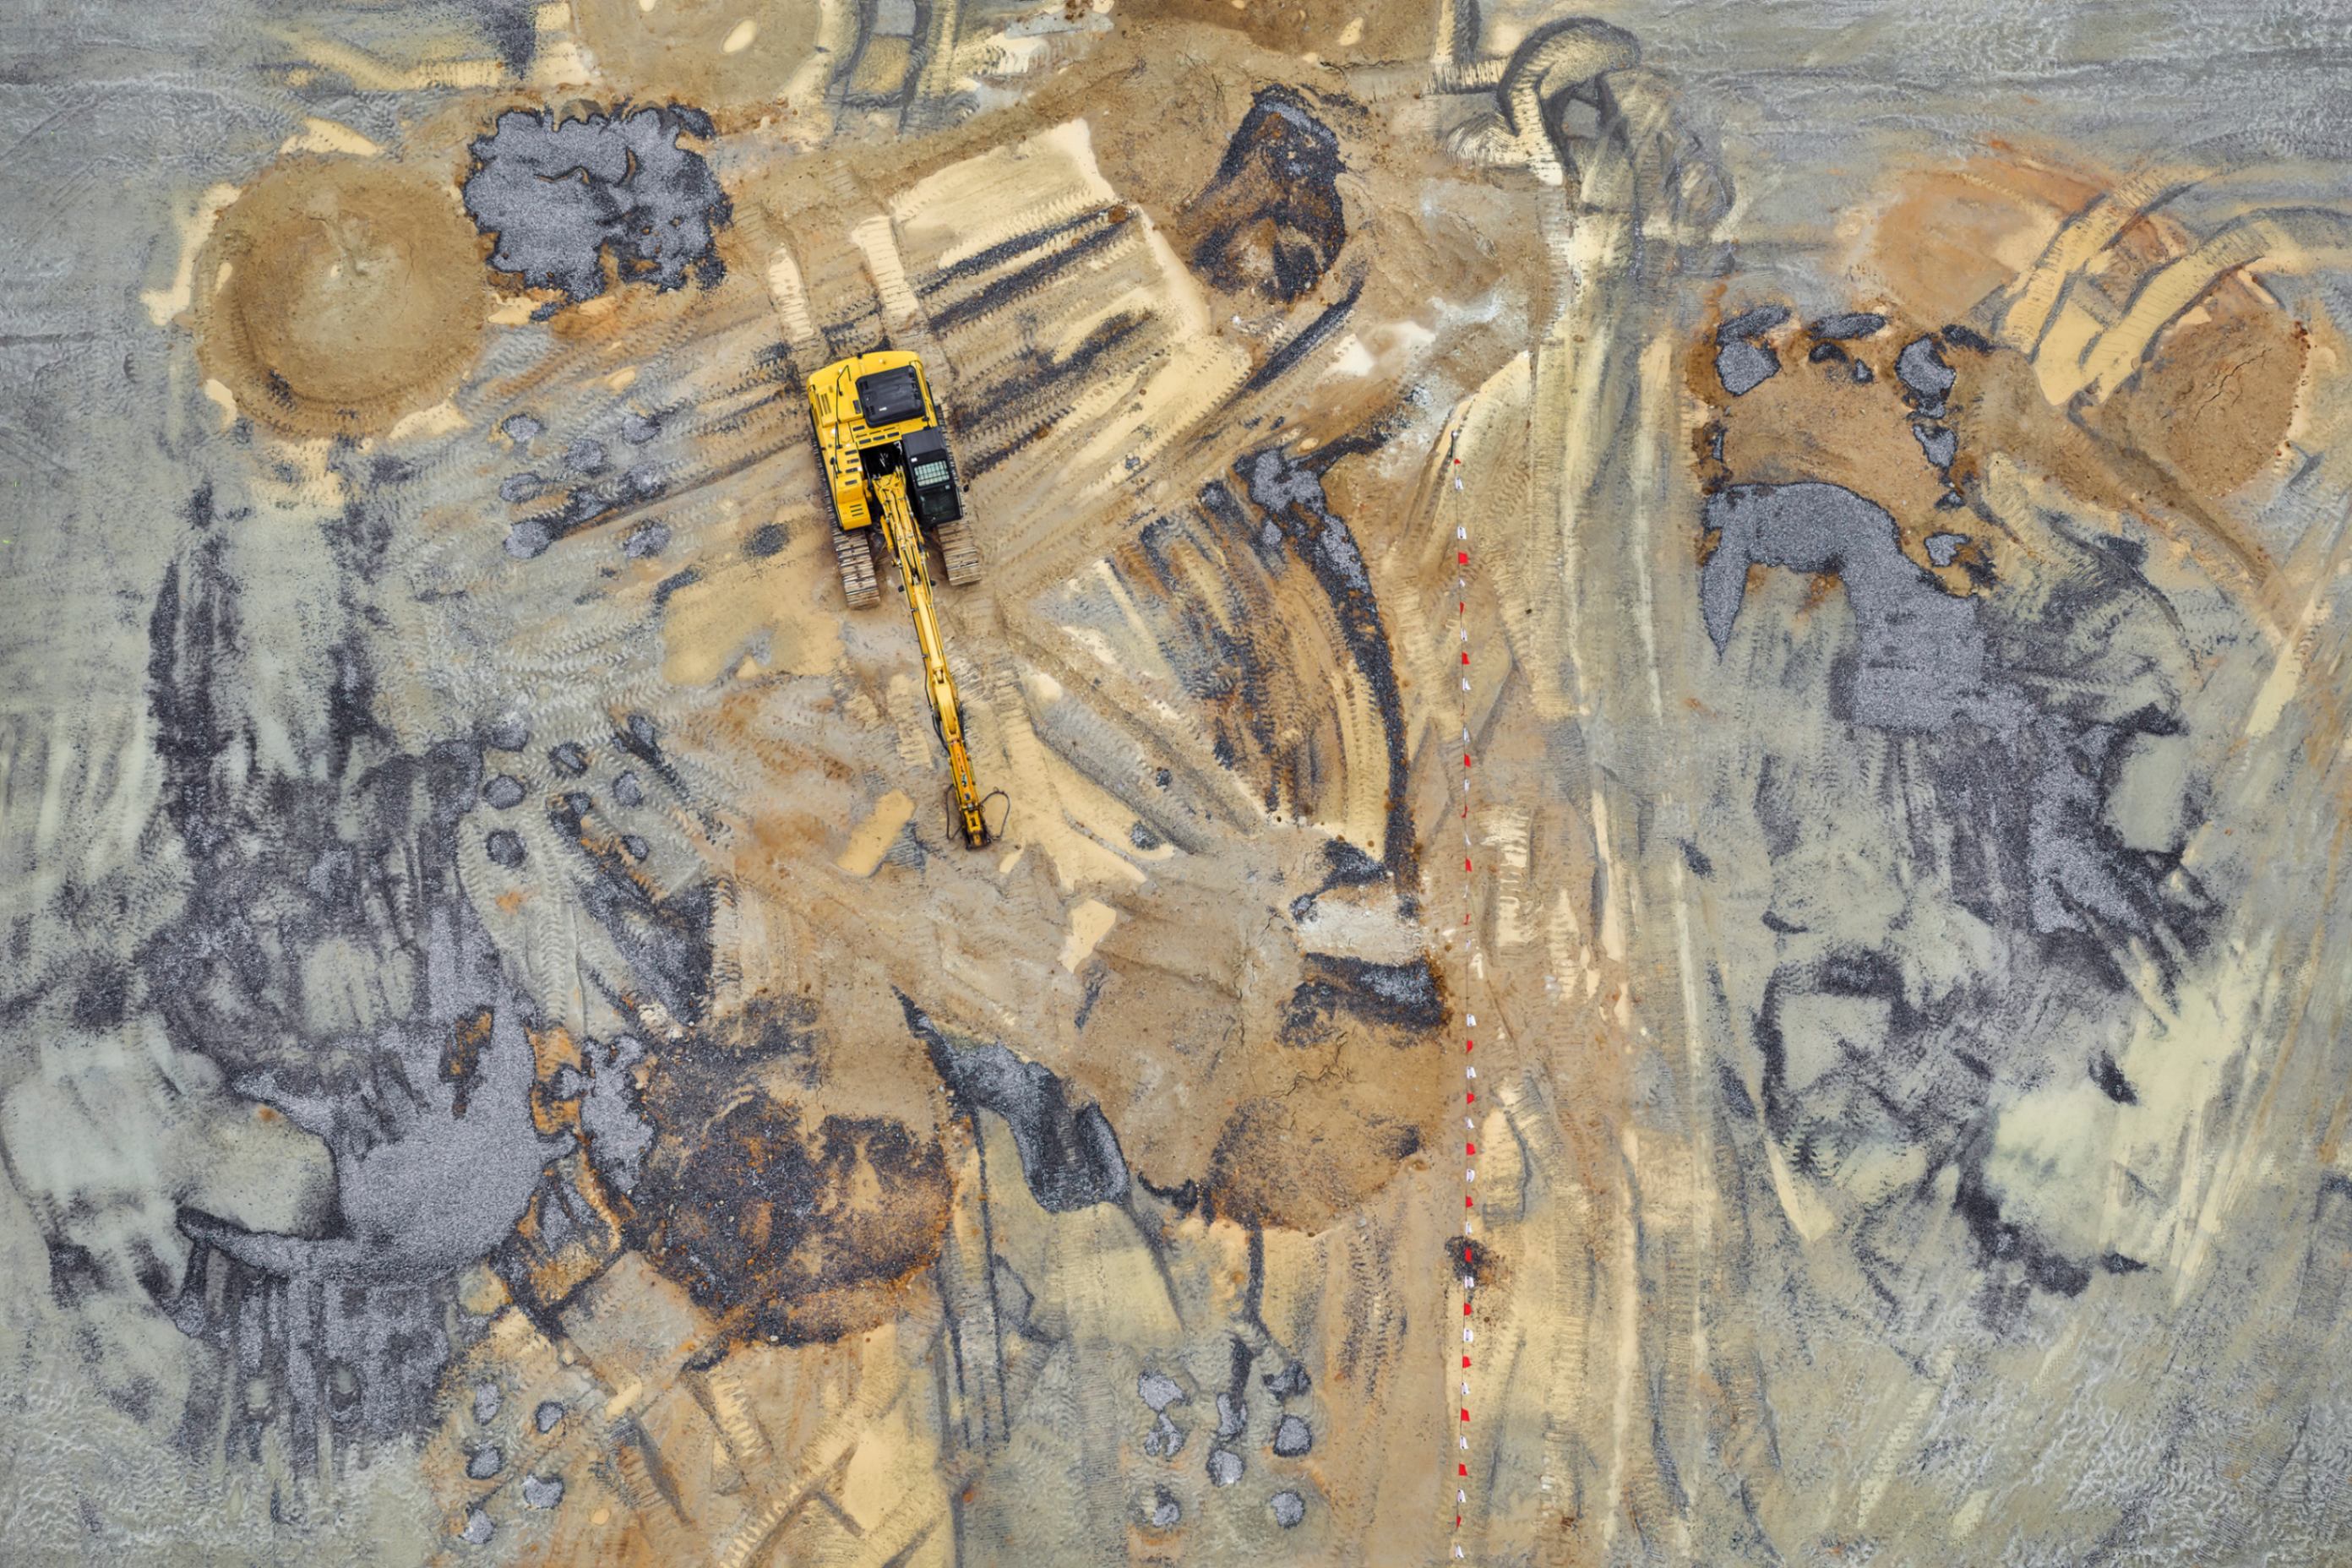 Drone photograph of a construction site in Stone Mountain, Georgia